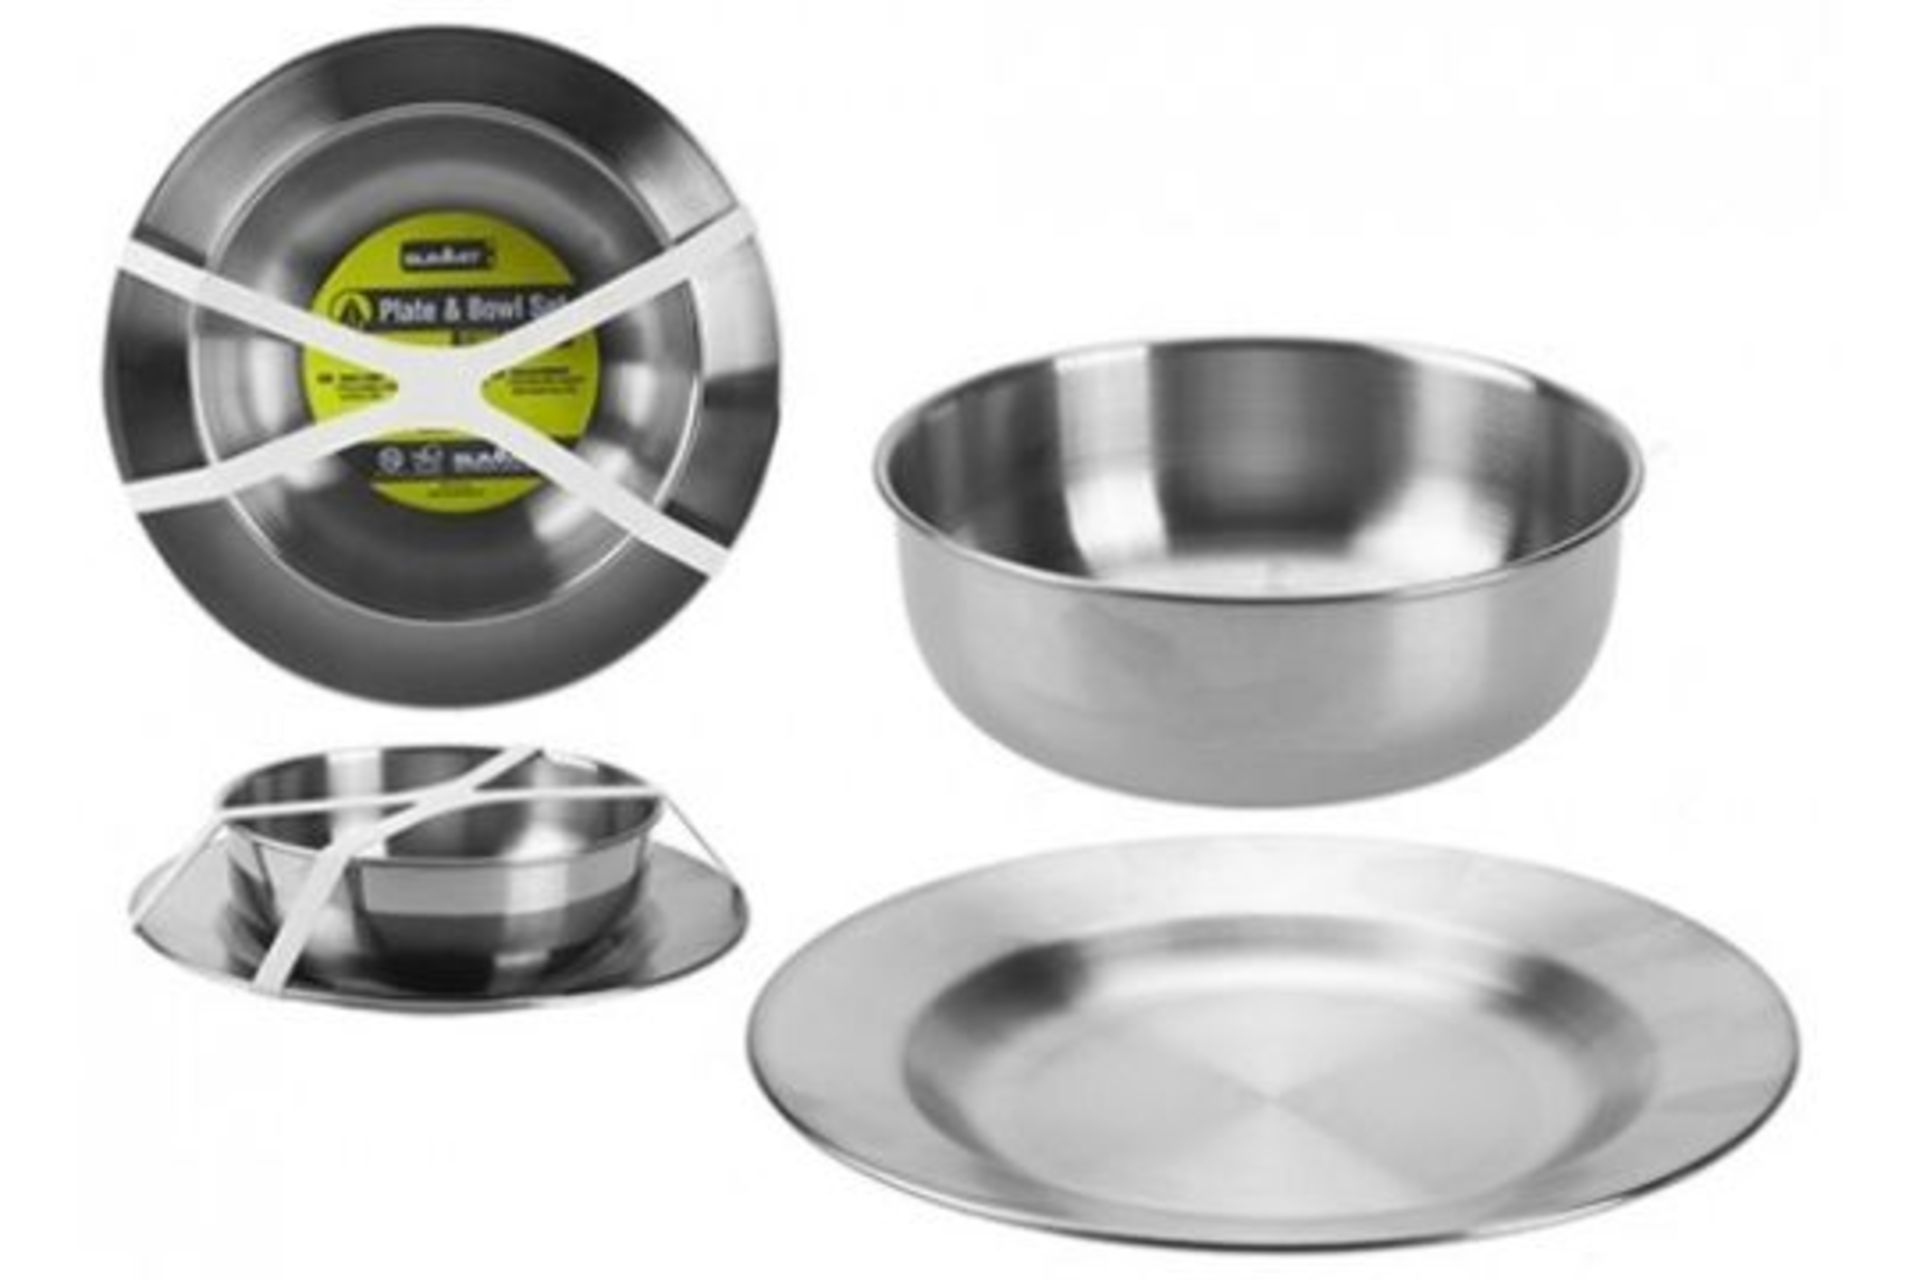 New Summit Stainless Steel Plate & Bowl Set